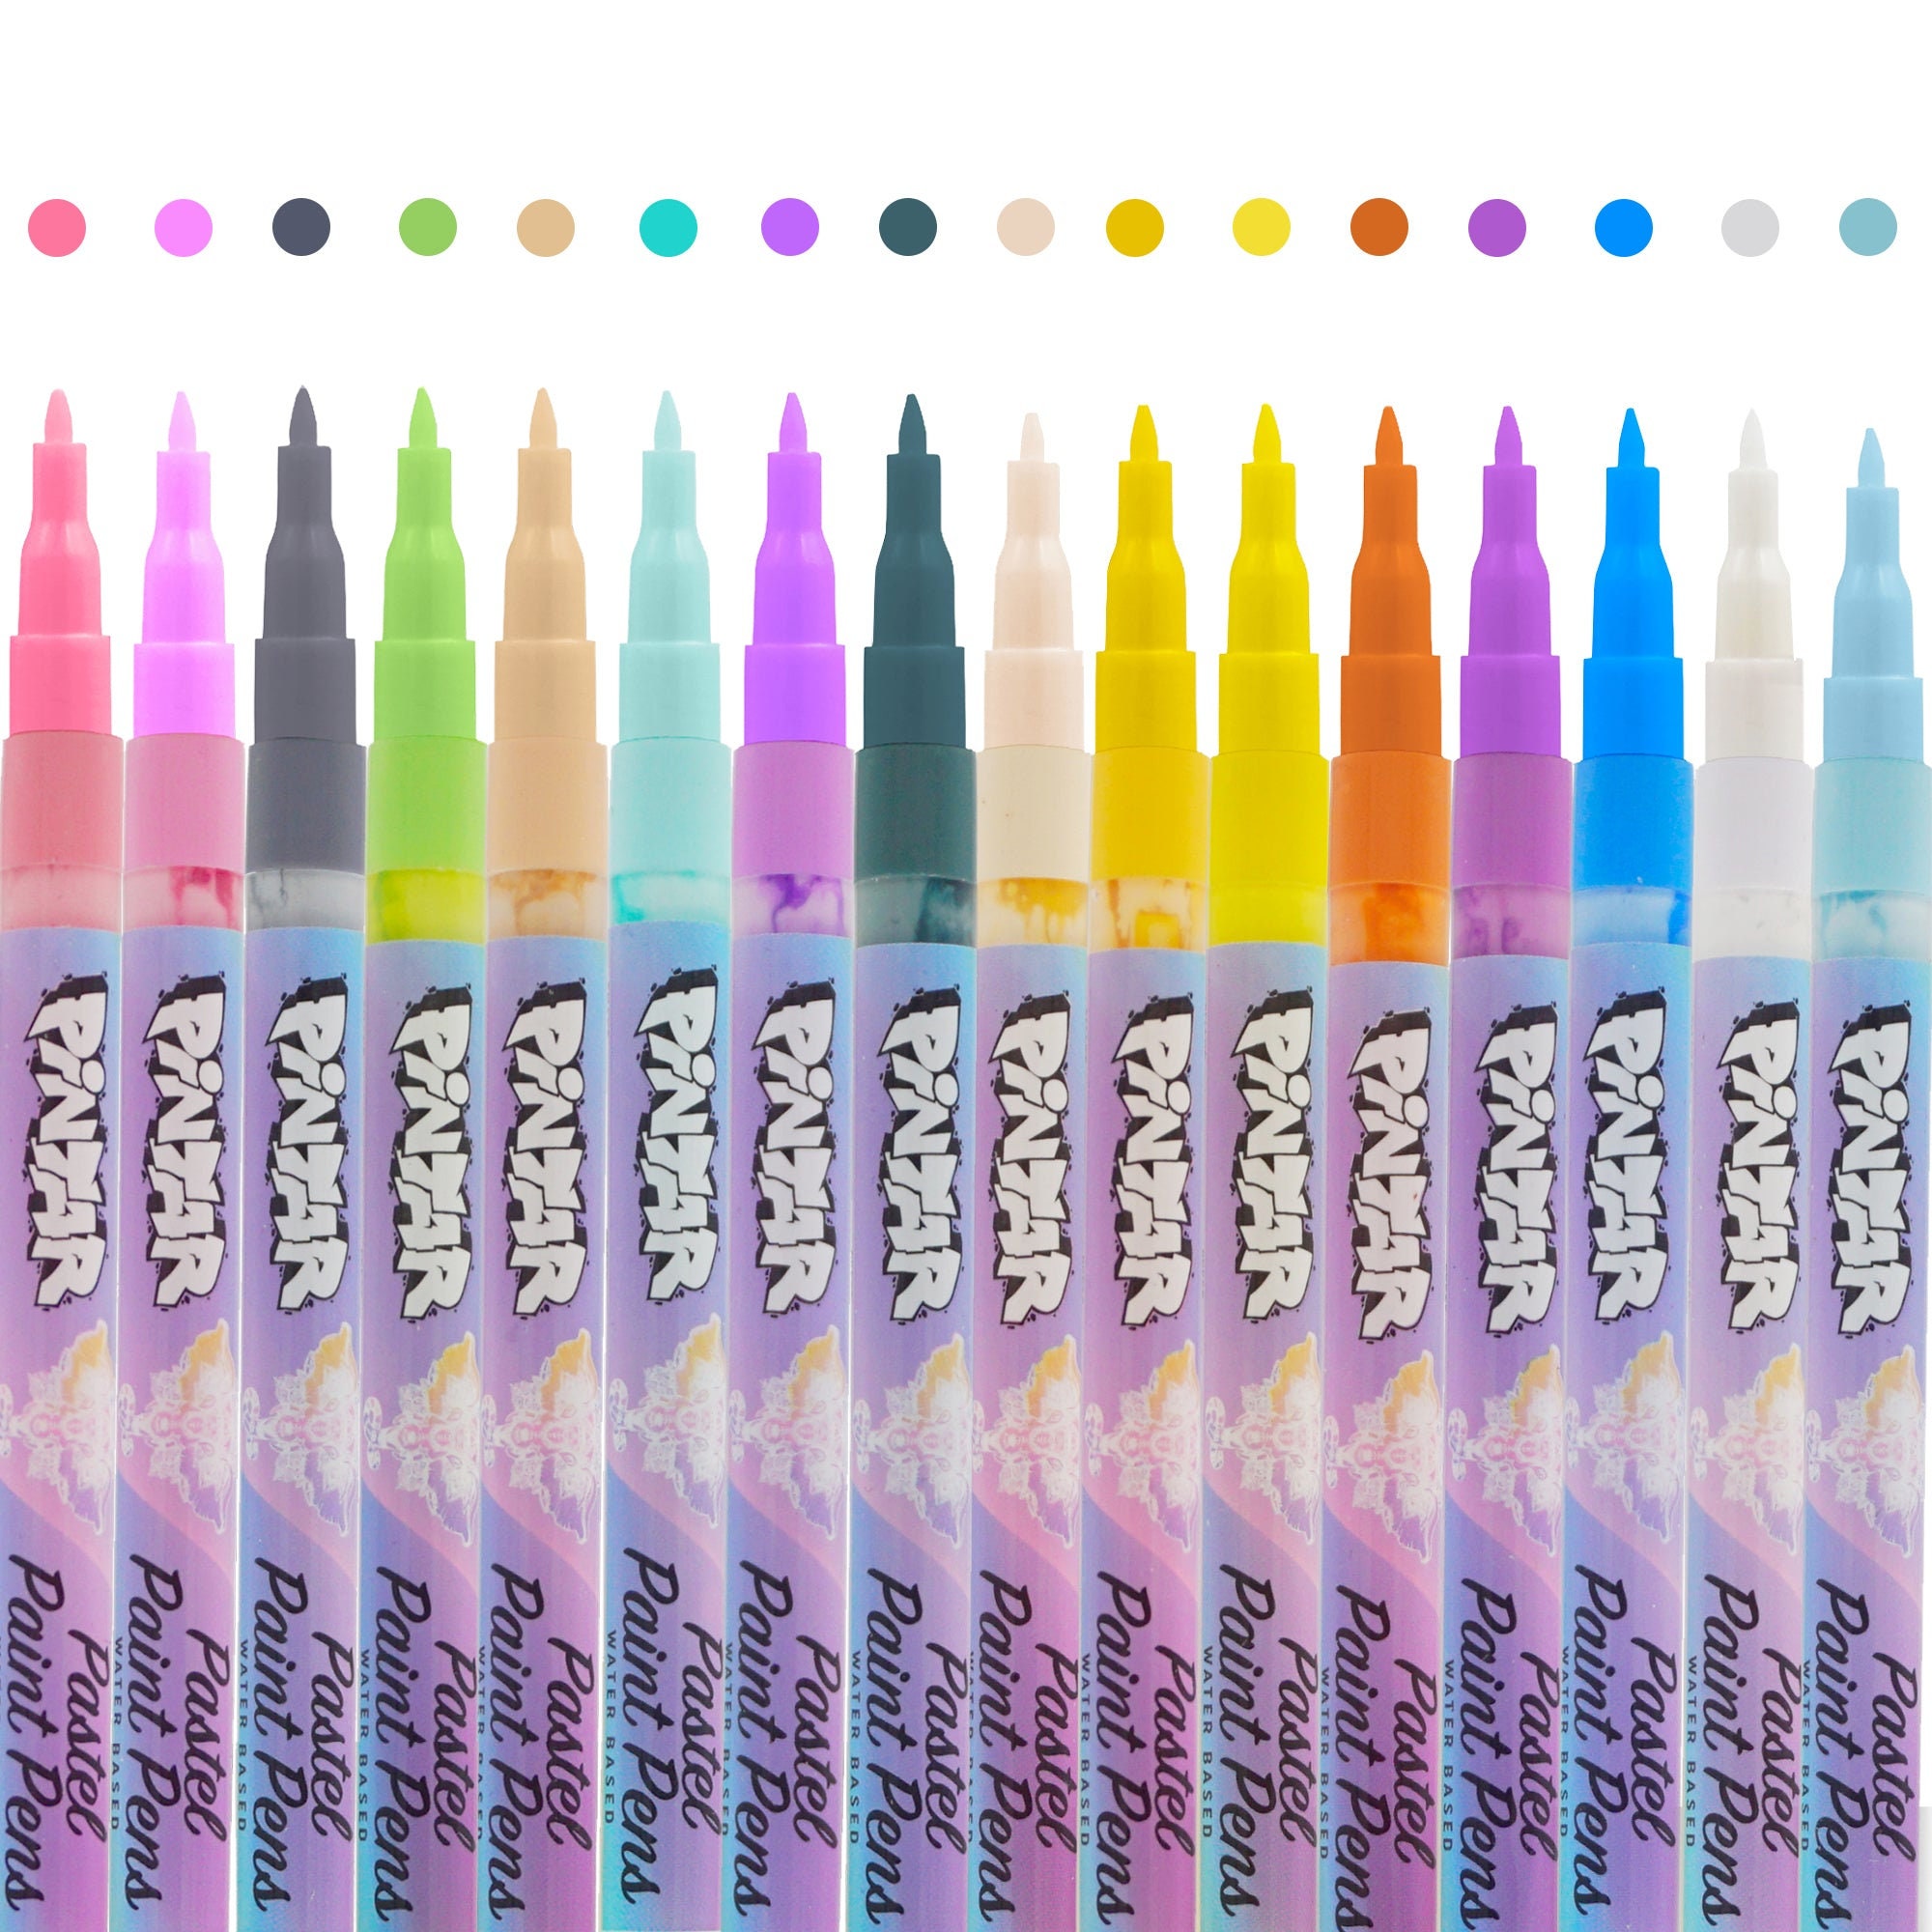 Pintar Skin Tone Paint Pens And Water-based Marker 20 Pack Set